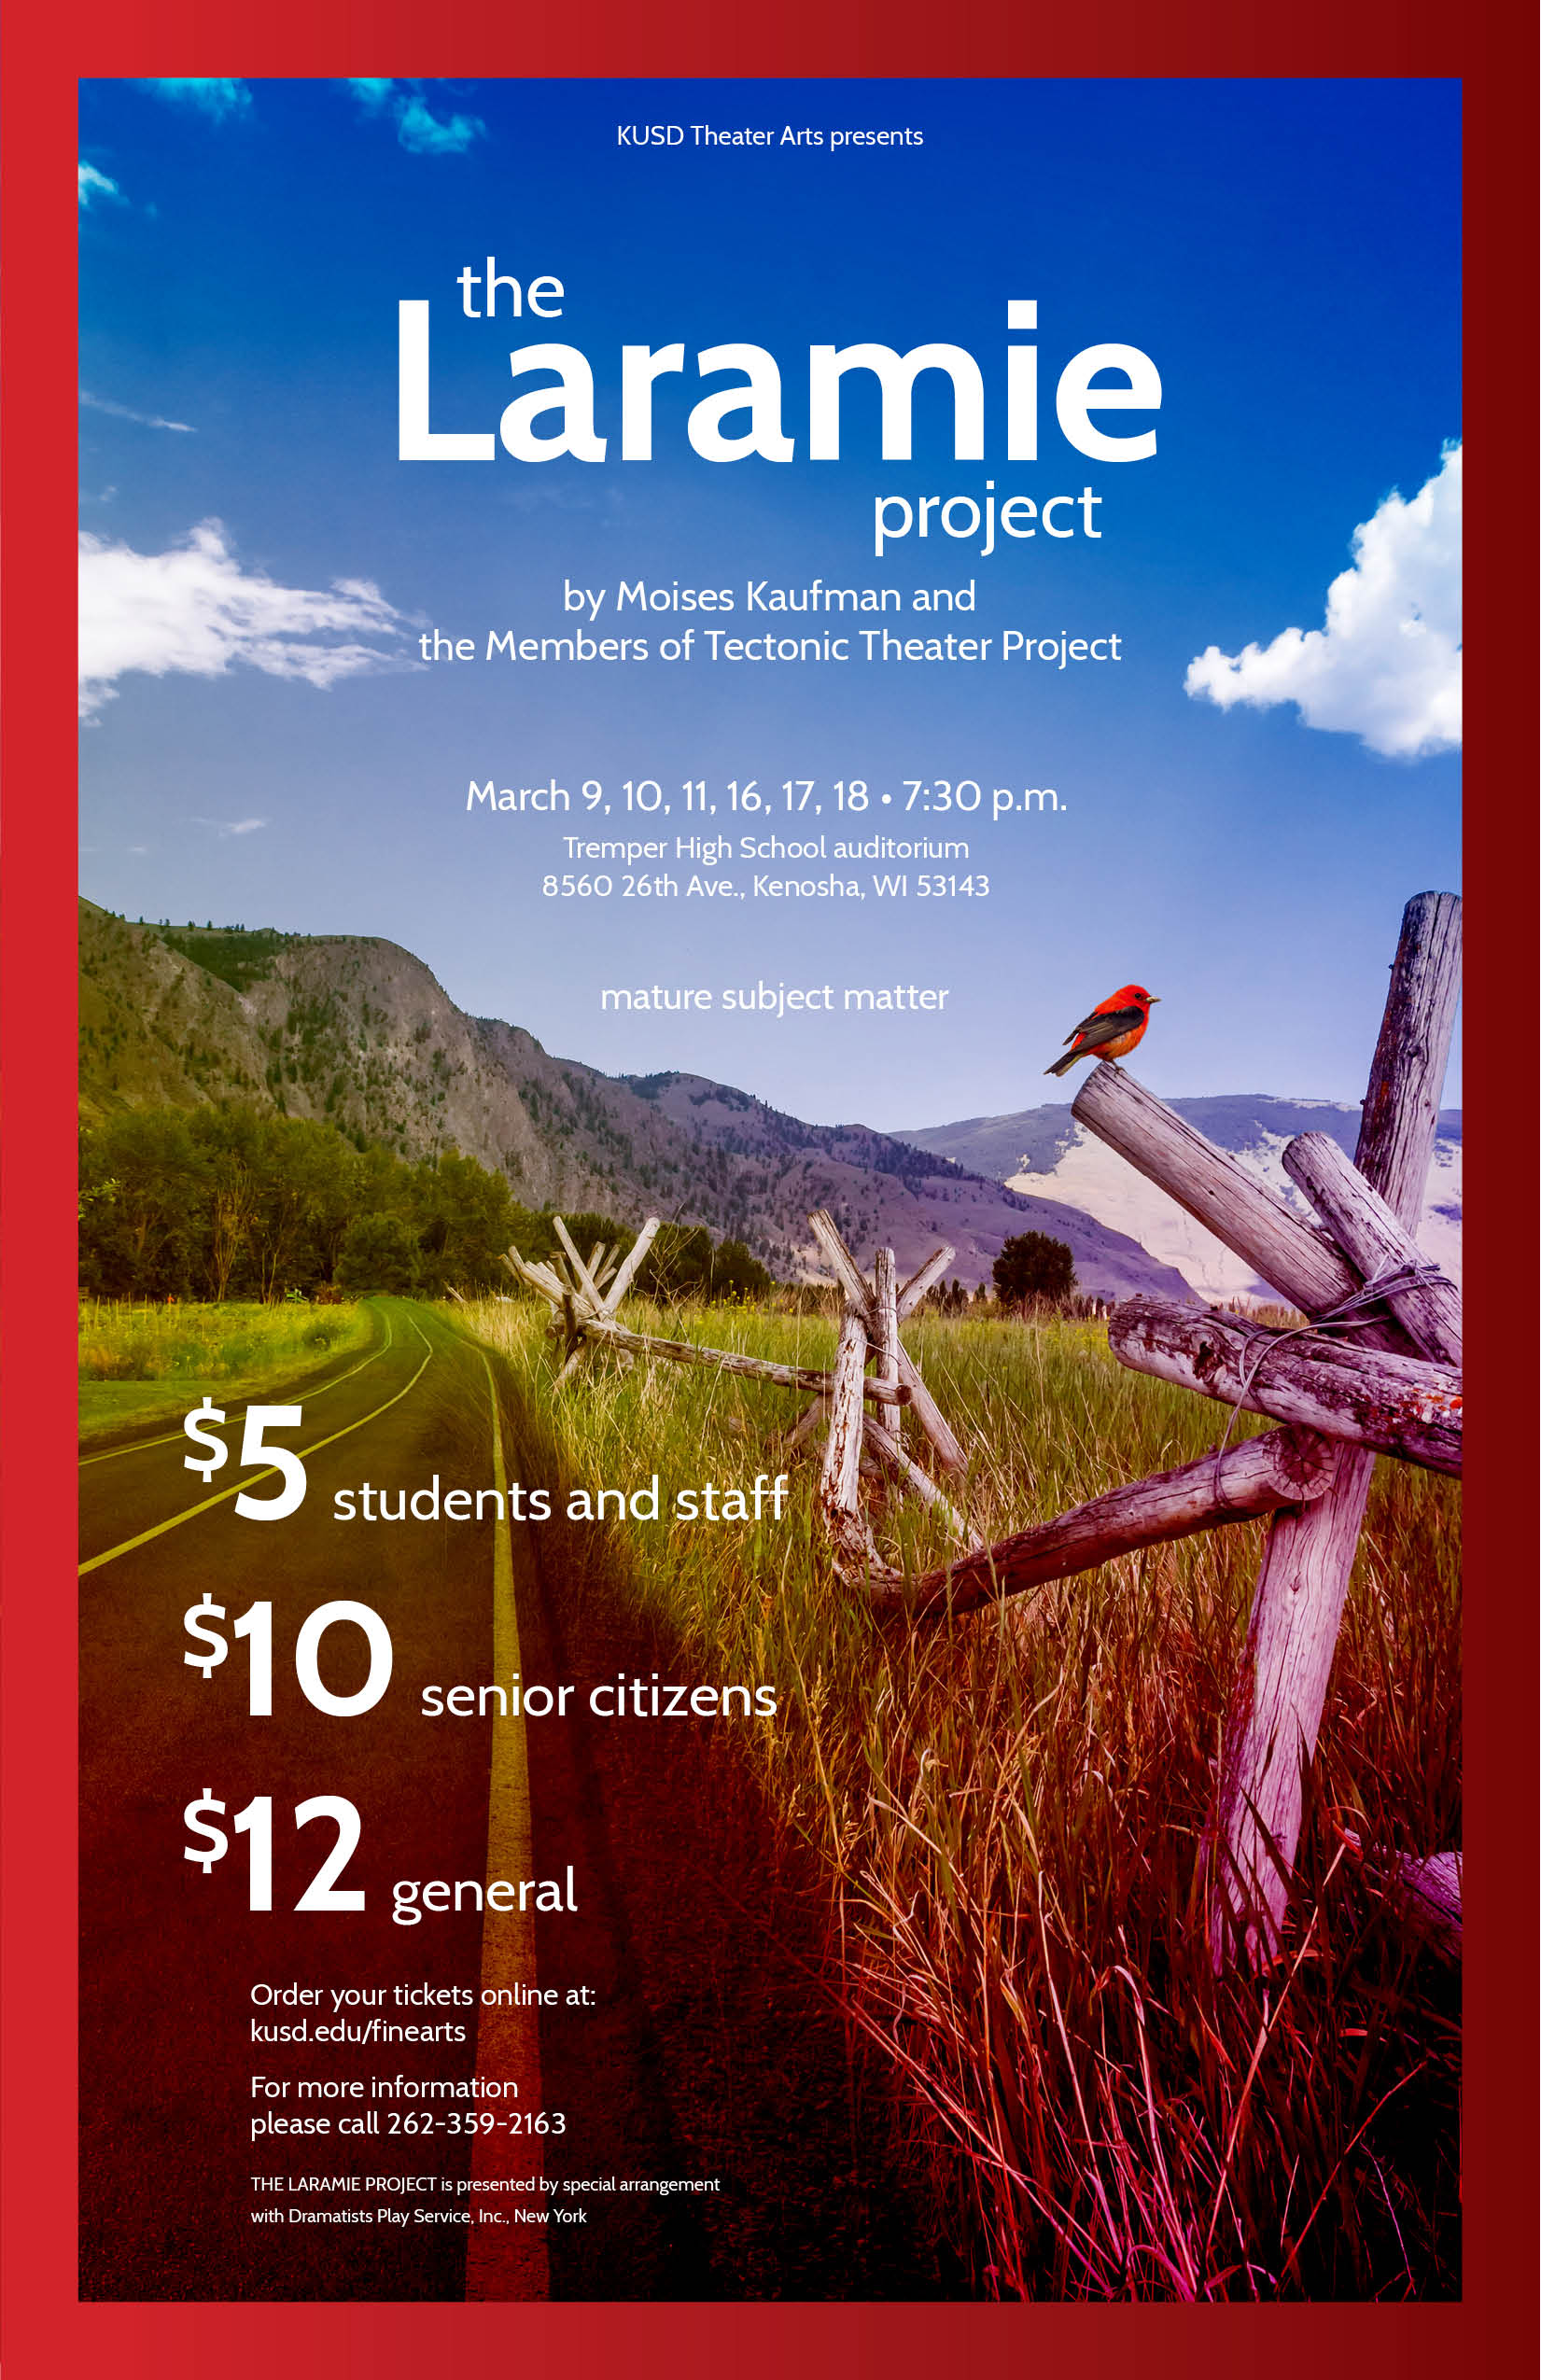 The poster for The Laramie Project